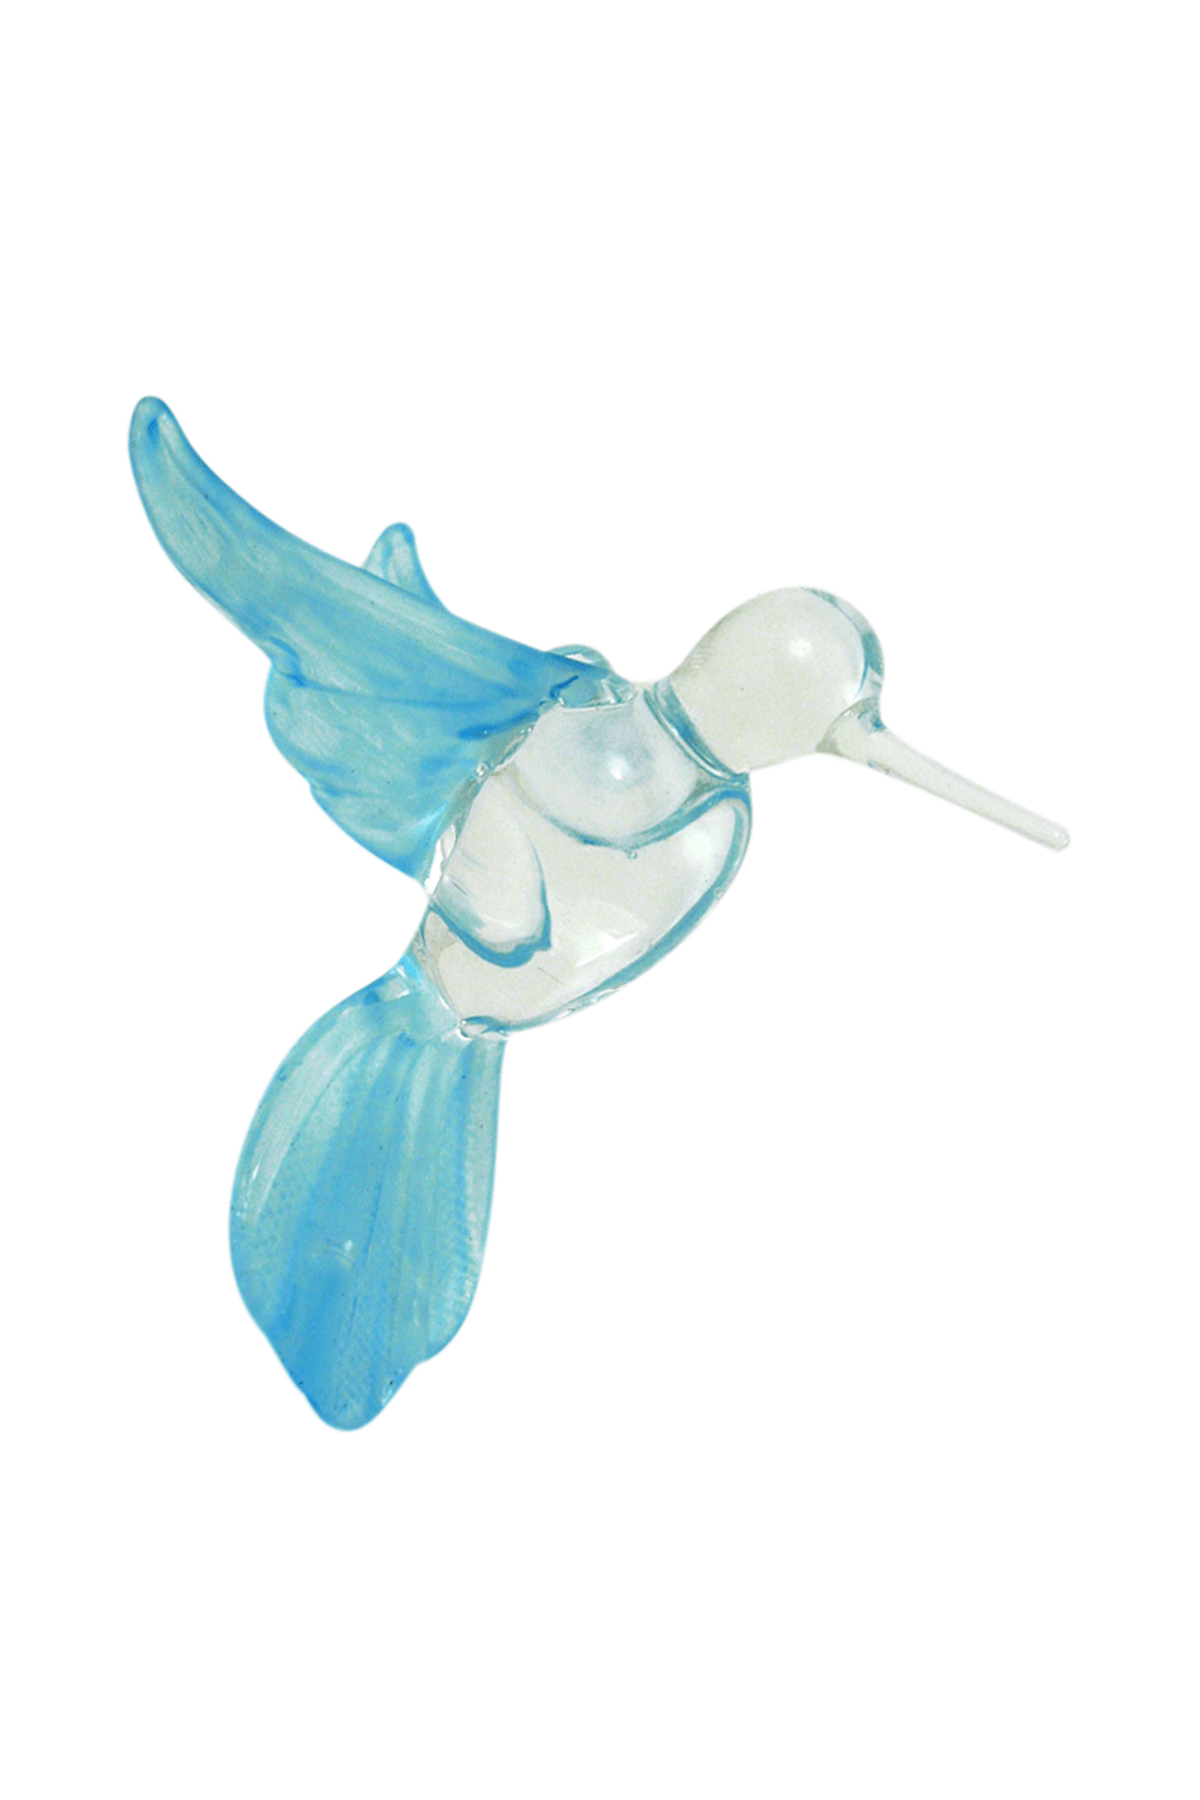 Crystal Castle Frosted Glass Hummingbird ornament in Blue.